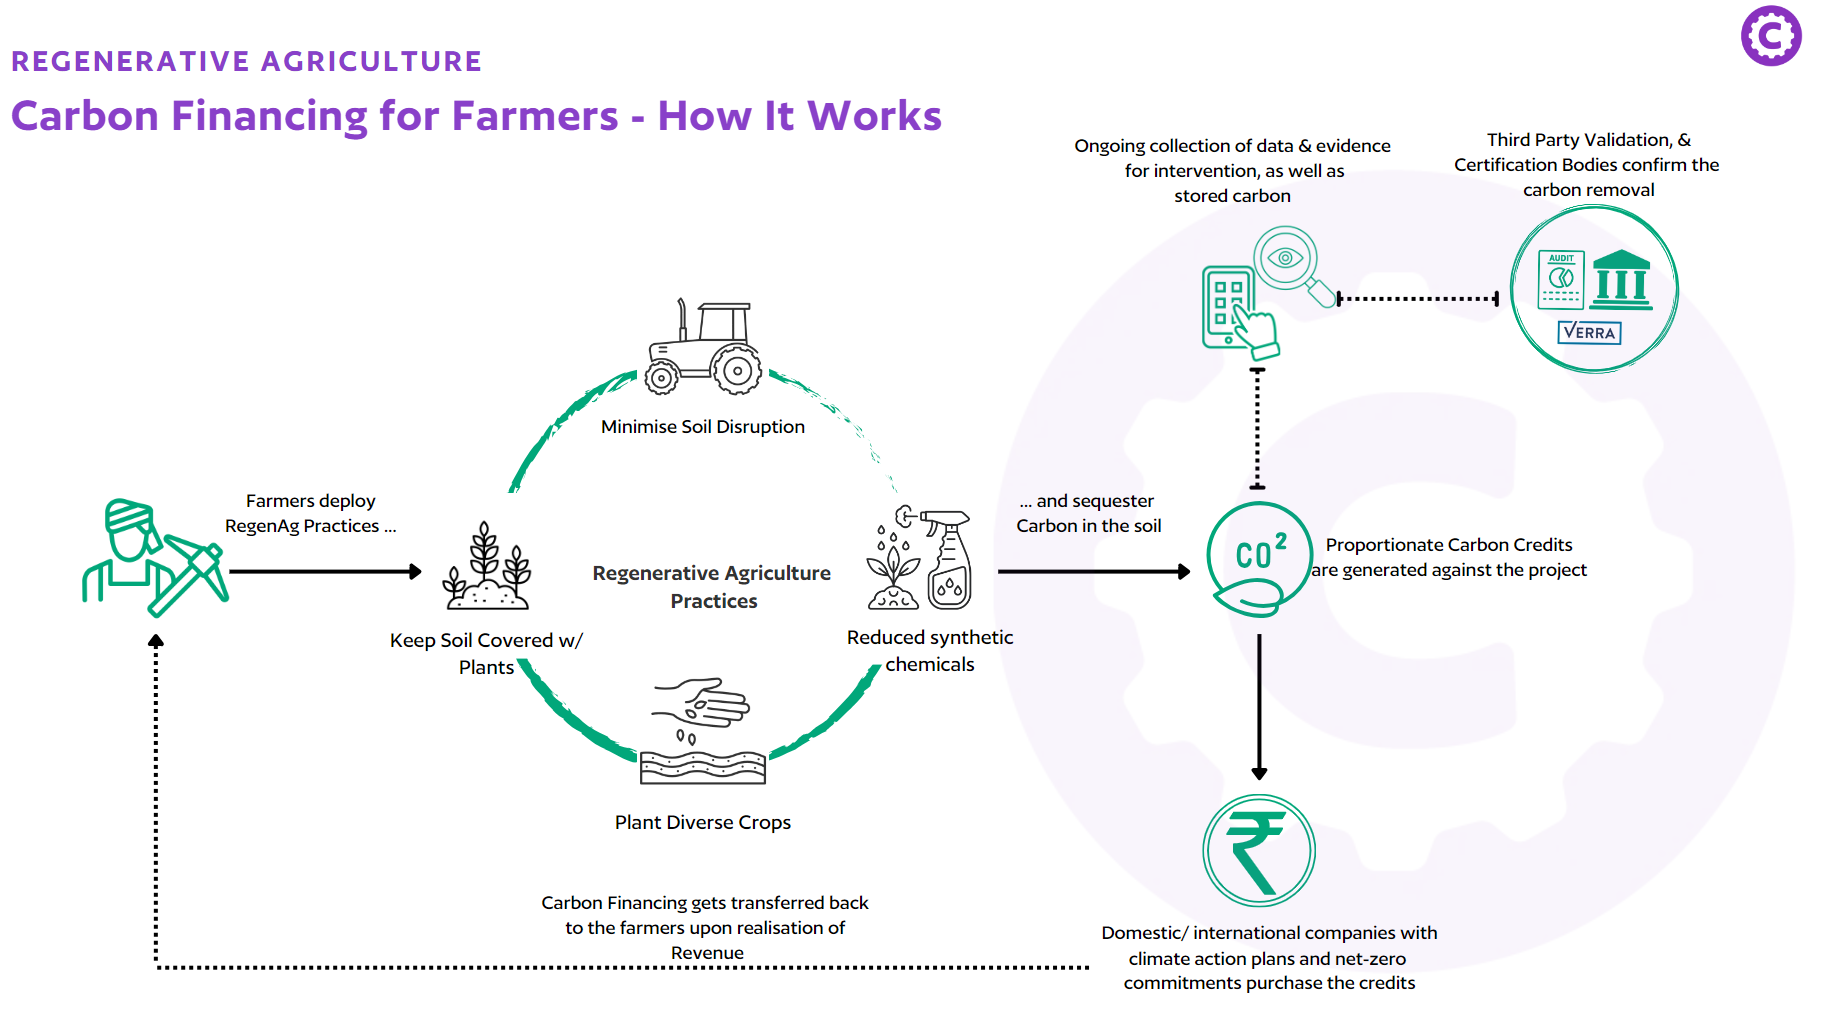 What will it take for smallholder farmers to transition to low-emissions agriculture?